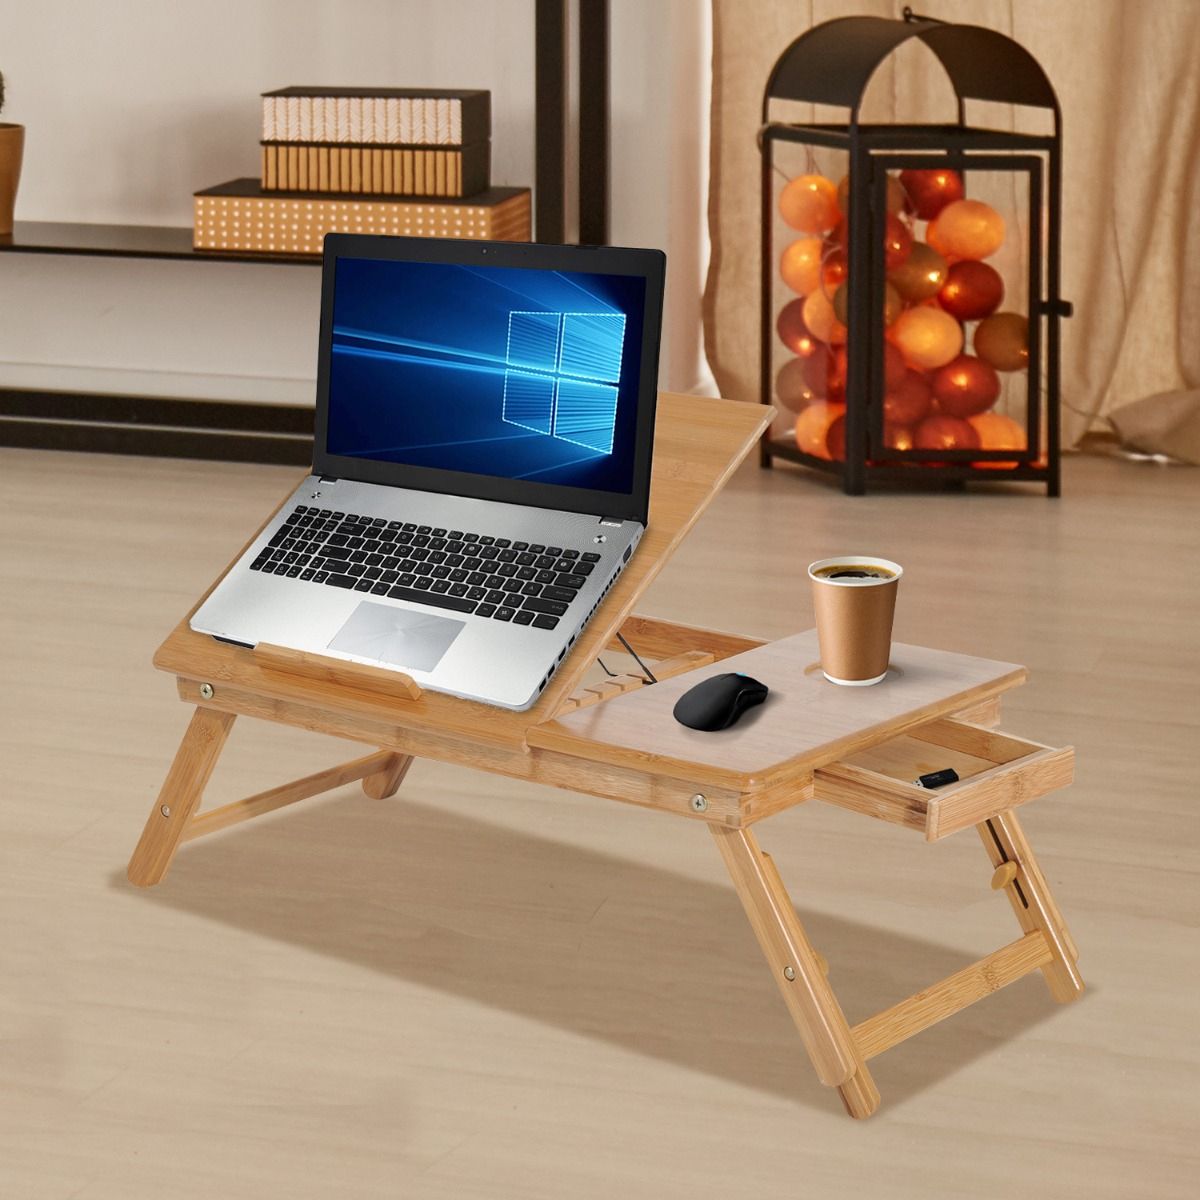 Homcom Portable Desk Foldable Bamboo Wood Laptop Stand Notebook Desk Throughout Cherry Adjustable Laptop Desks (View 9 of 15)